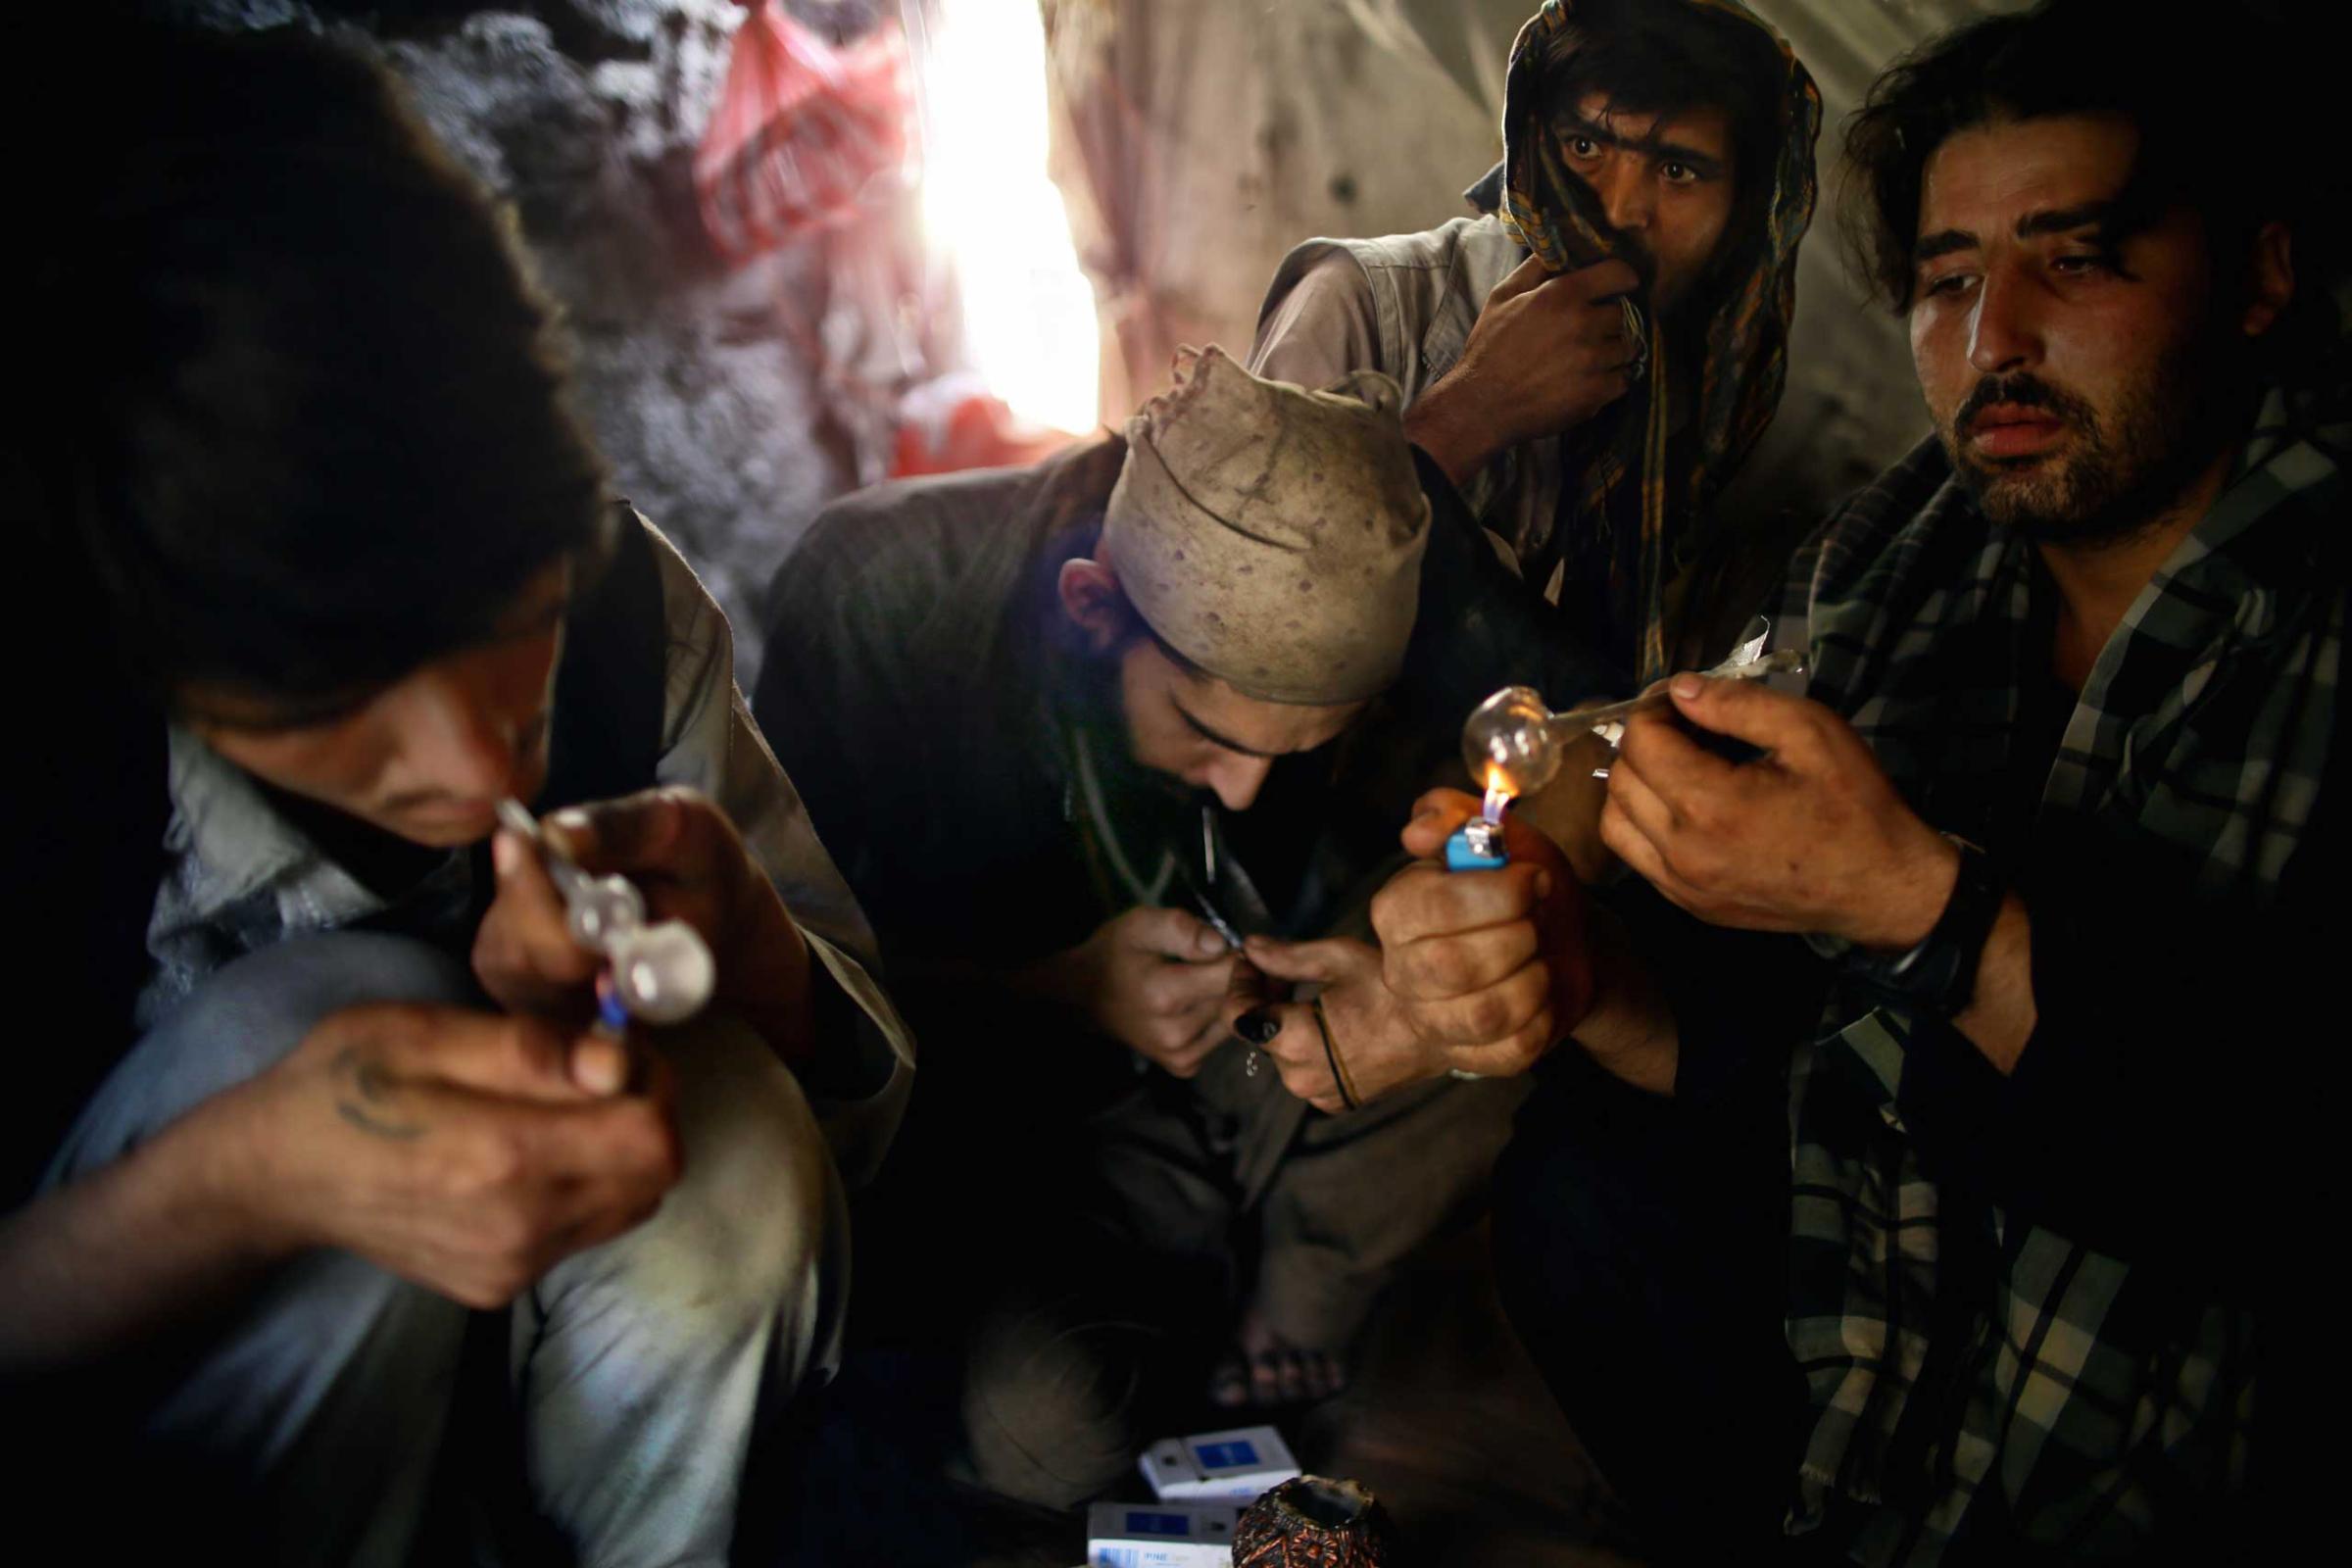 Beneath the Pul-e Sukhta bridge in Western Kabul a group of Pakistani heroin addicts take refuge from the summer sun, huddled within a tent - smoking, injecting and sleeping in a putrid squalor. Pictured above are Emal, Rahim, Ajmal and Wahid (left to right) who have been sharing a tent for the past two weeks.